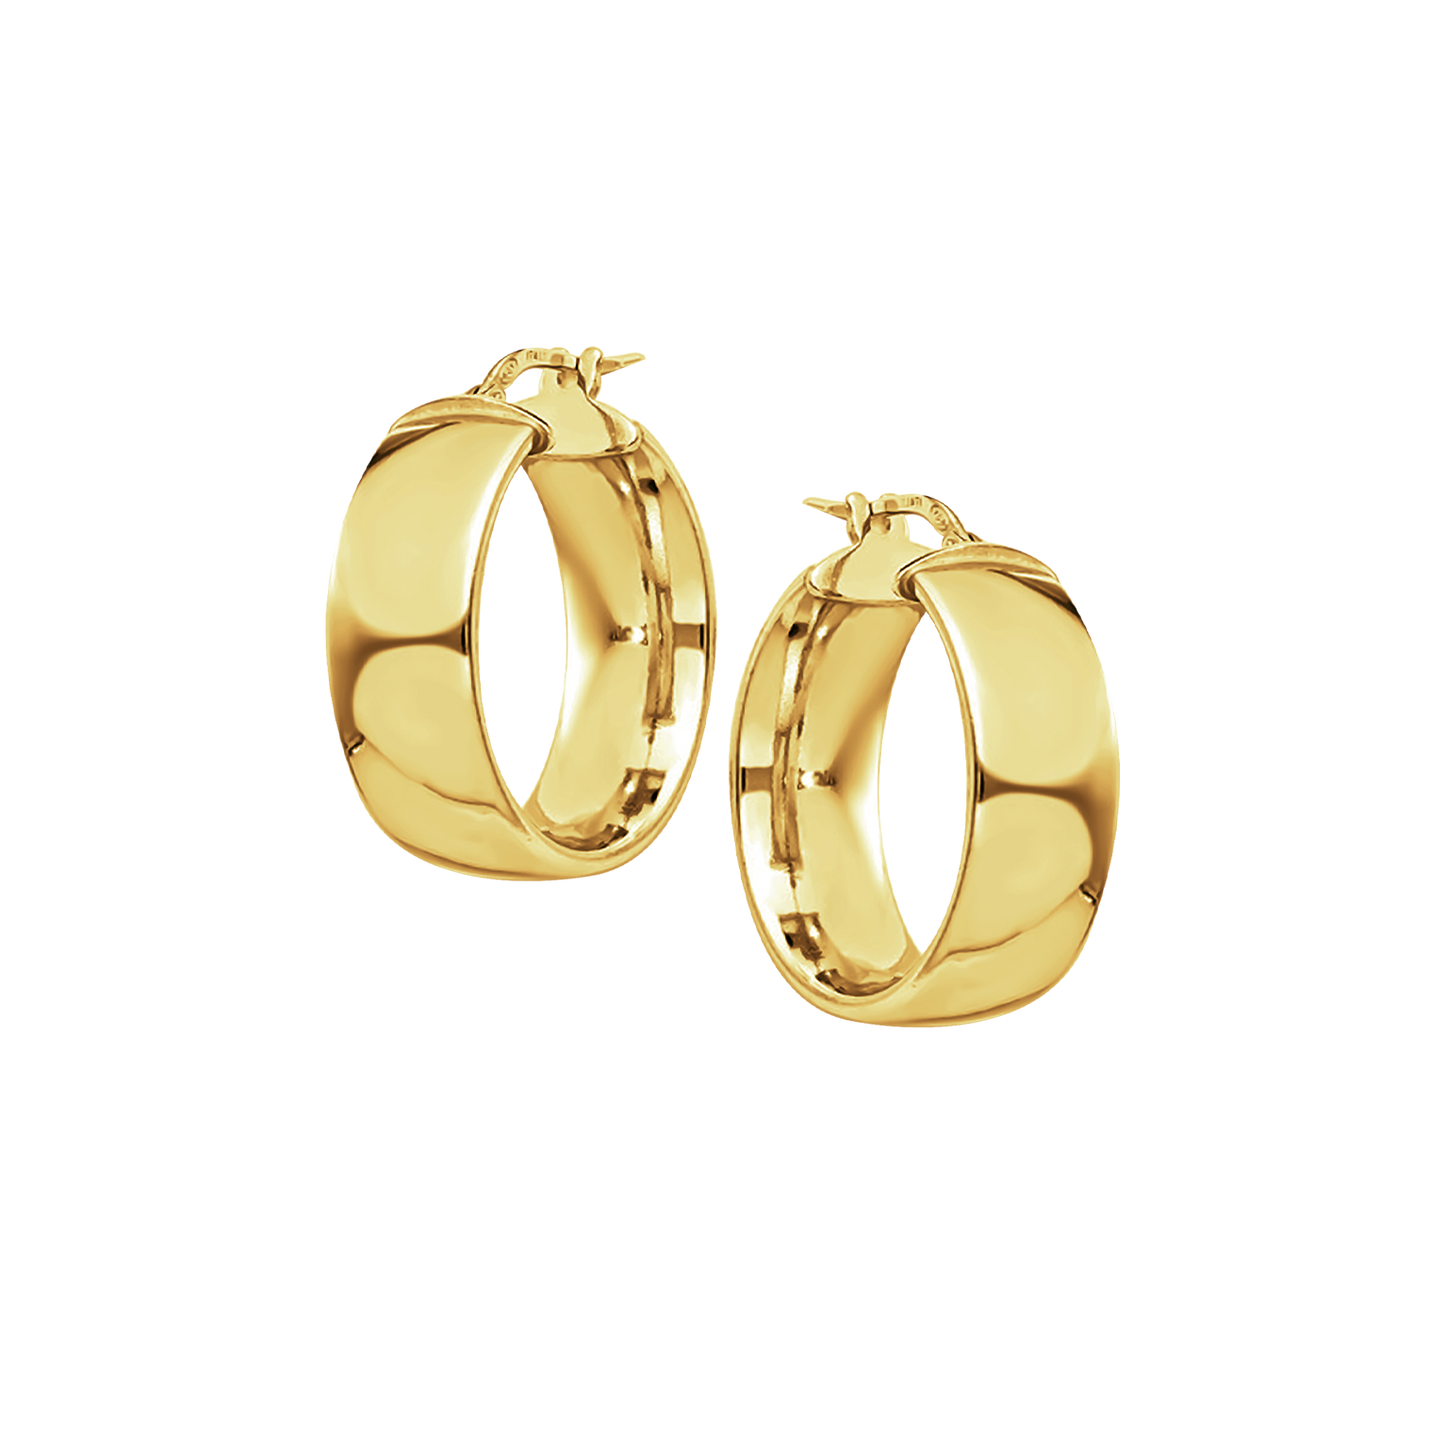 4mm Plain Hoops in 9ct Yellow Gold